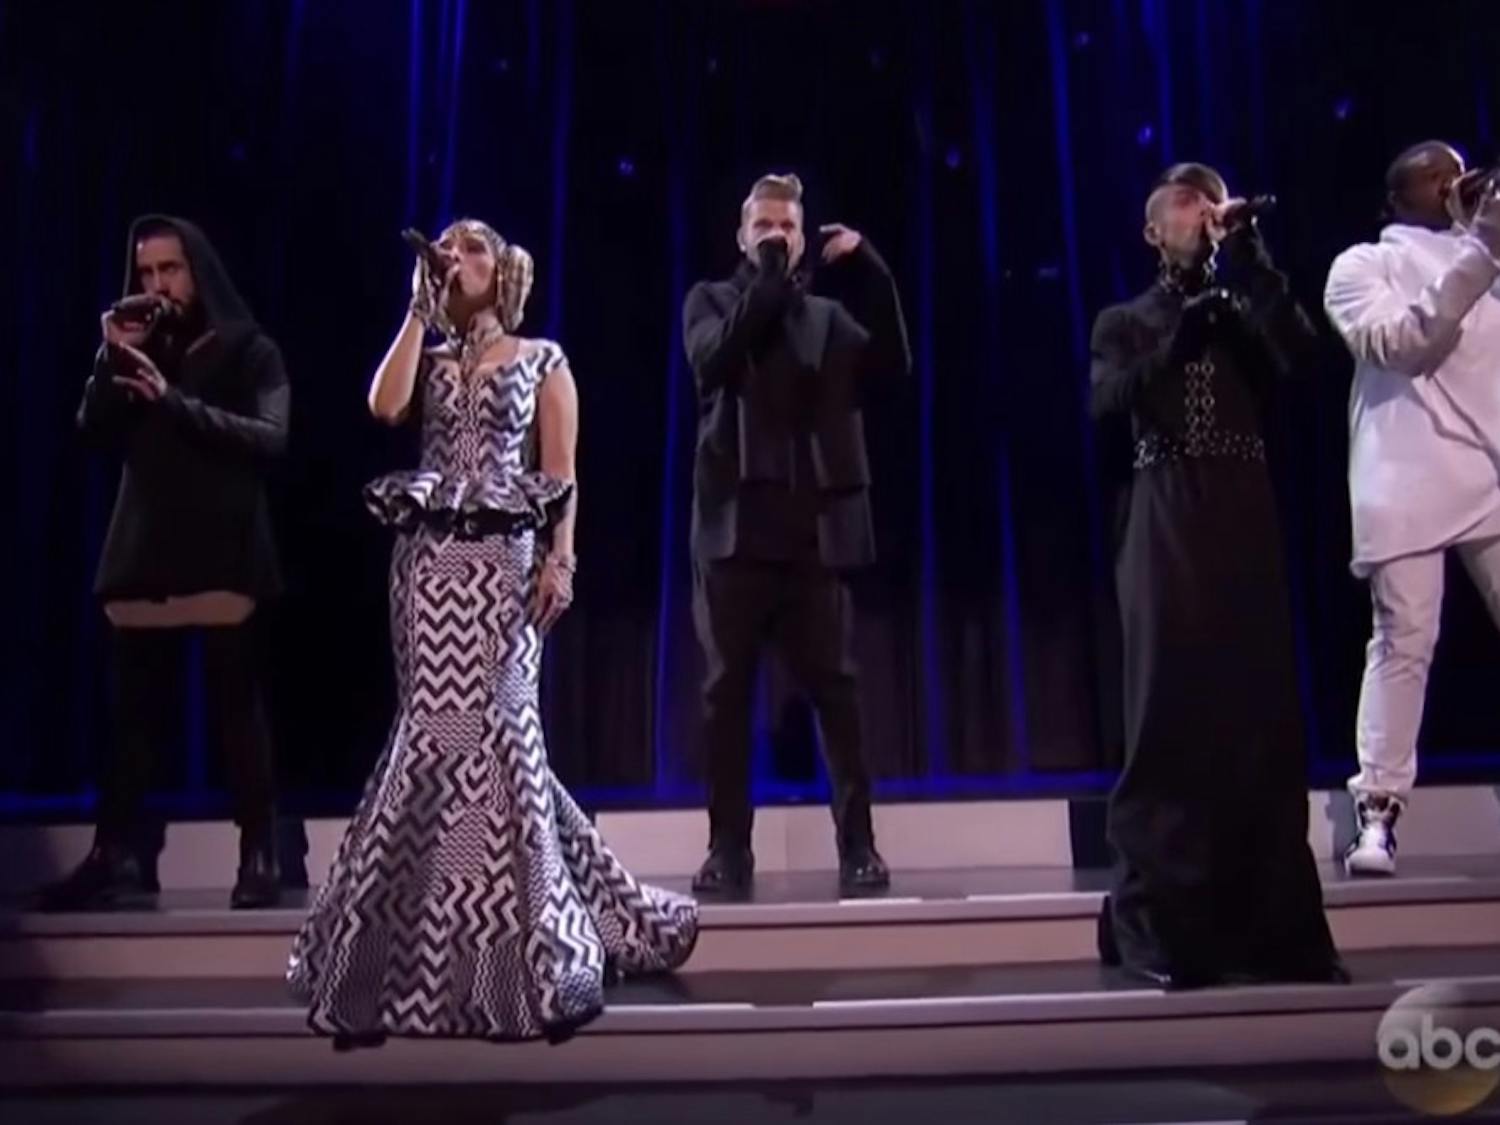 Pentatonix performs at the American Music Awards on Sunday, Nov. 22, 2015, at the Microsoft Theatre in Los Angeles.